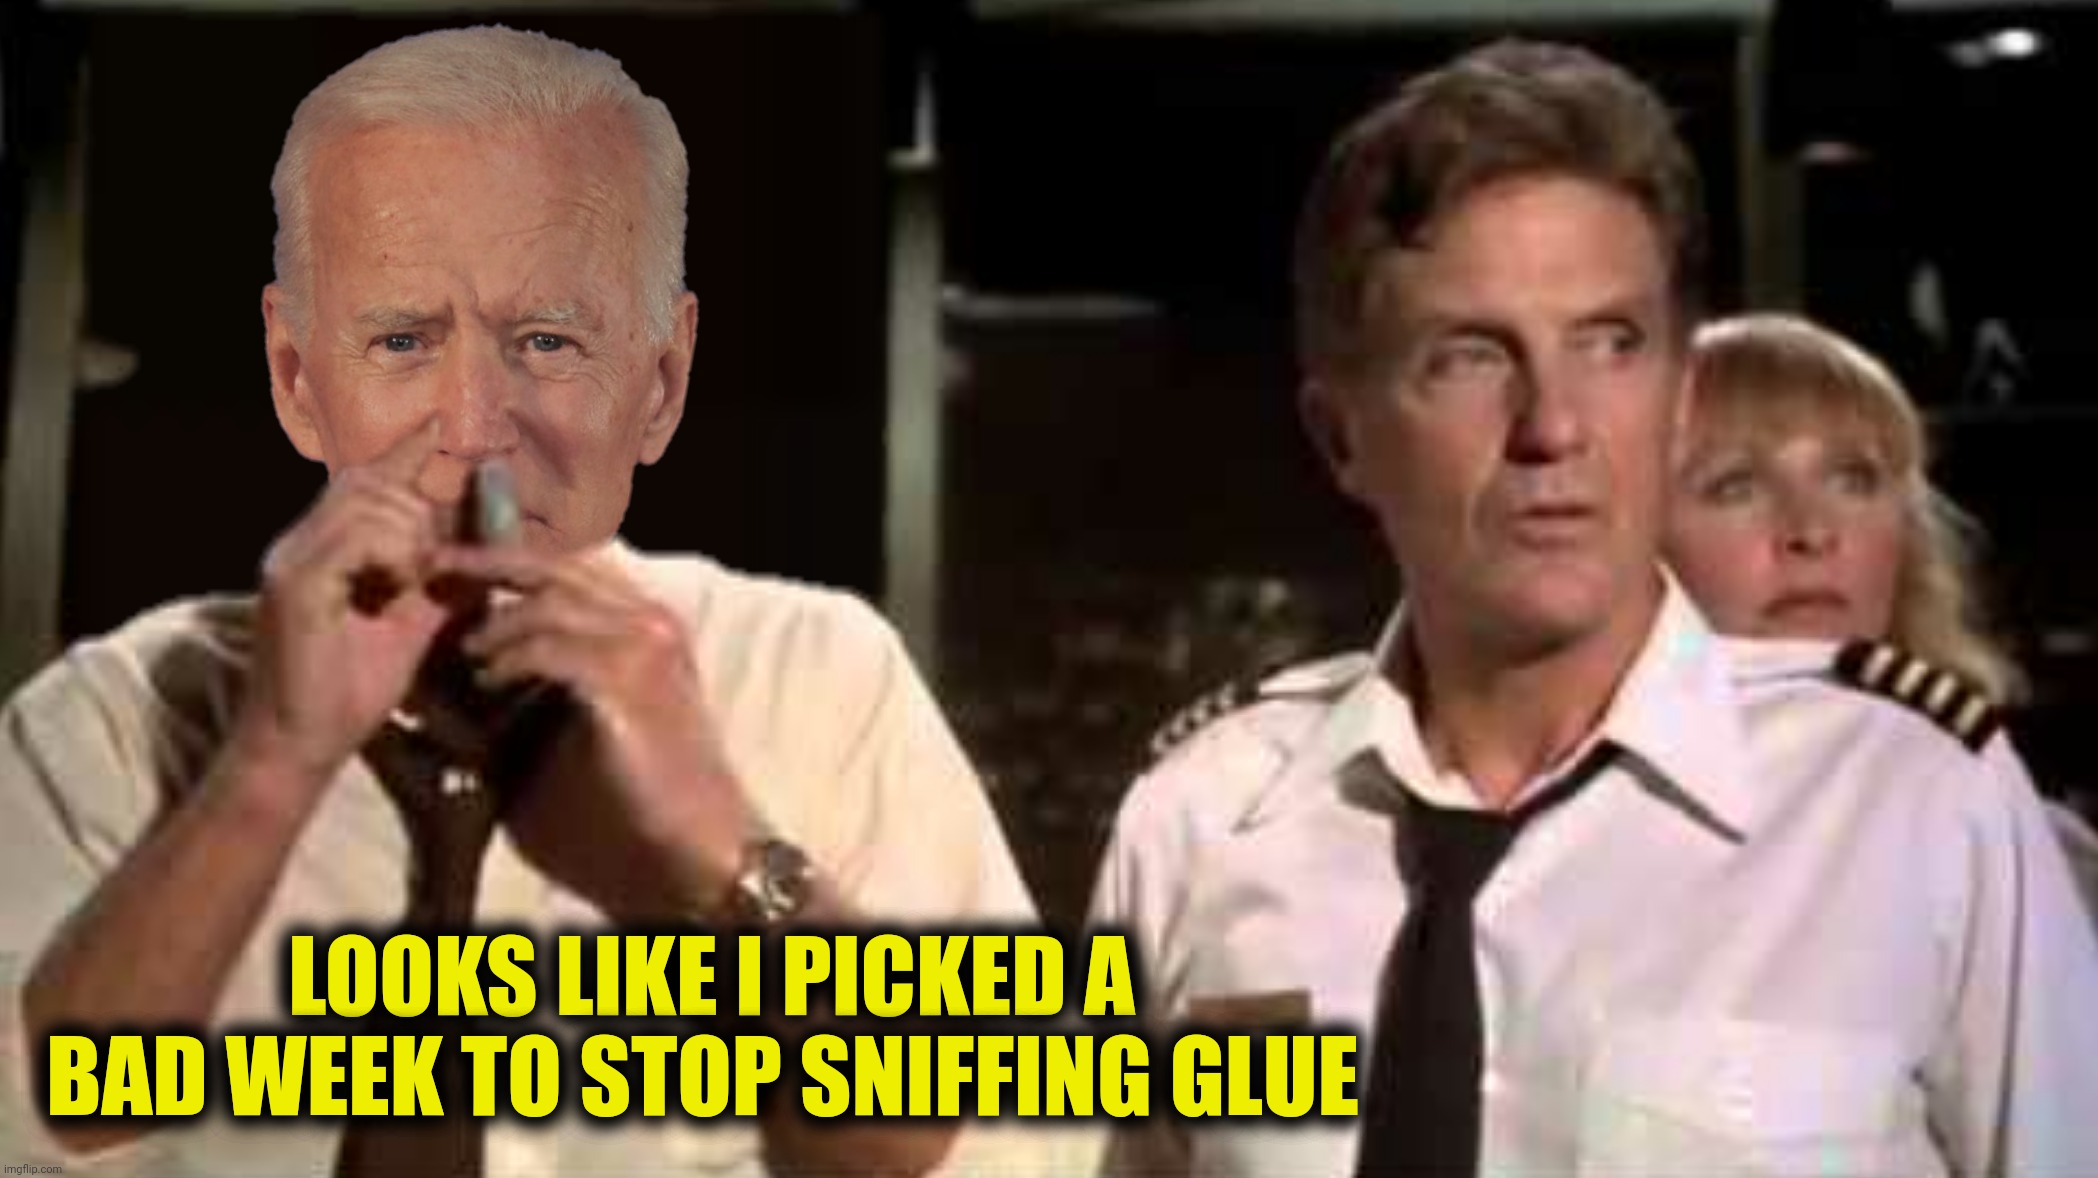 LOOKS LIKE I PICKED A BAD WEEK TO STOP SNIFFING GLUE | made w/ Imgflip meme maker